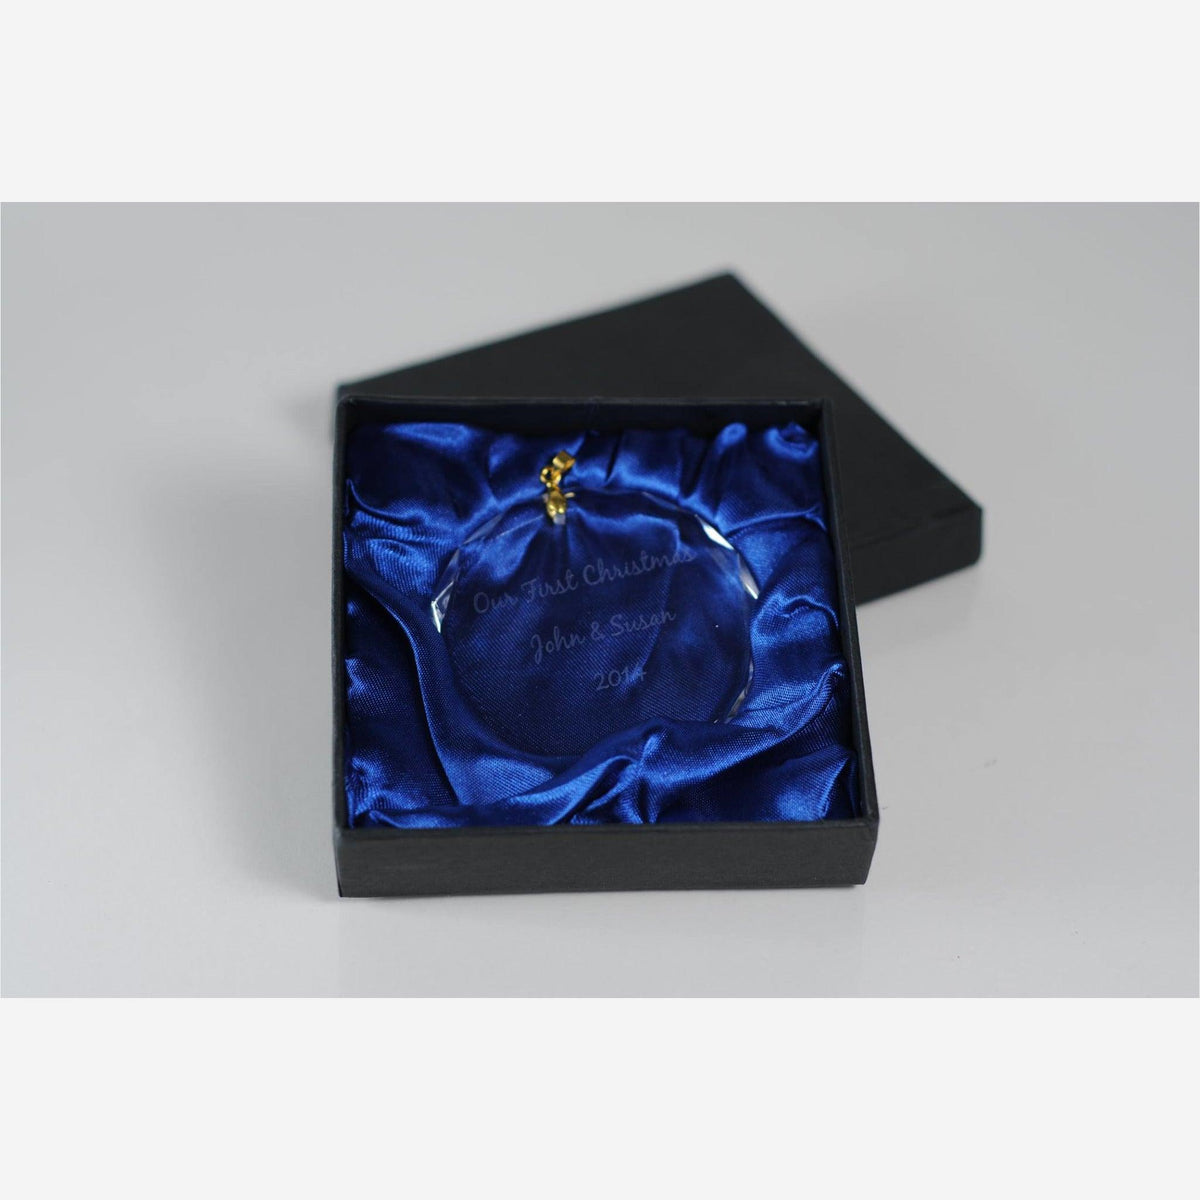 circle crystal ornament with gold clasp engraved "Our First Christmas John & Susan 2014" in black box with blue silk